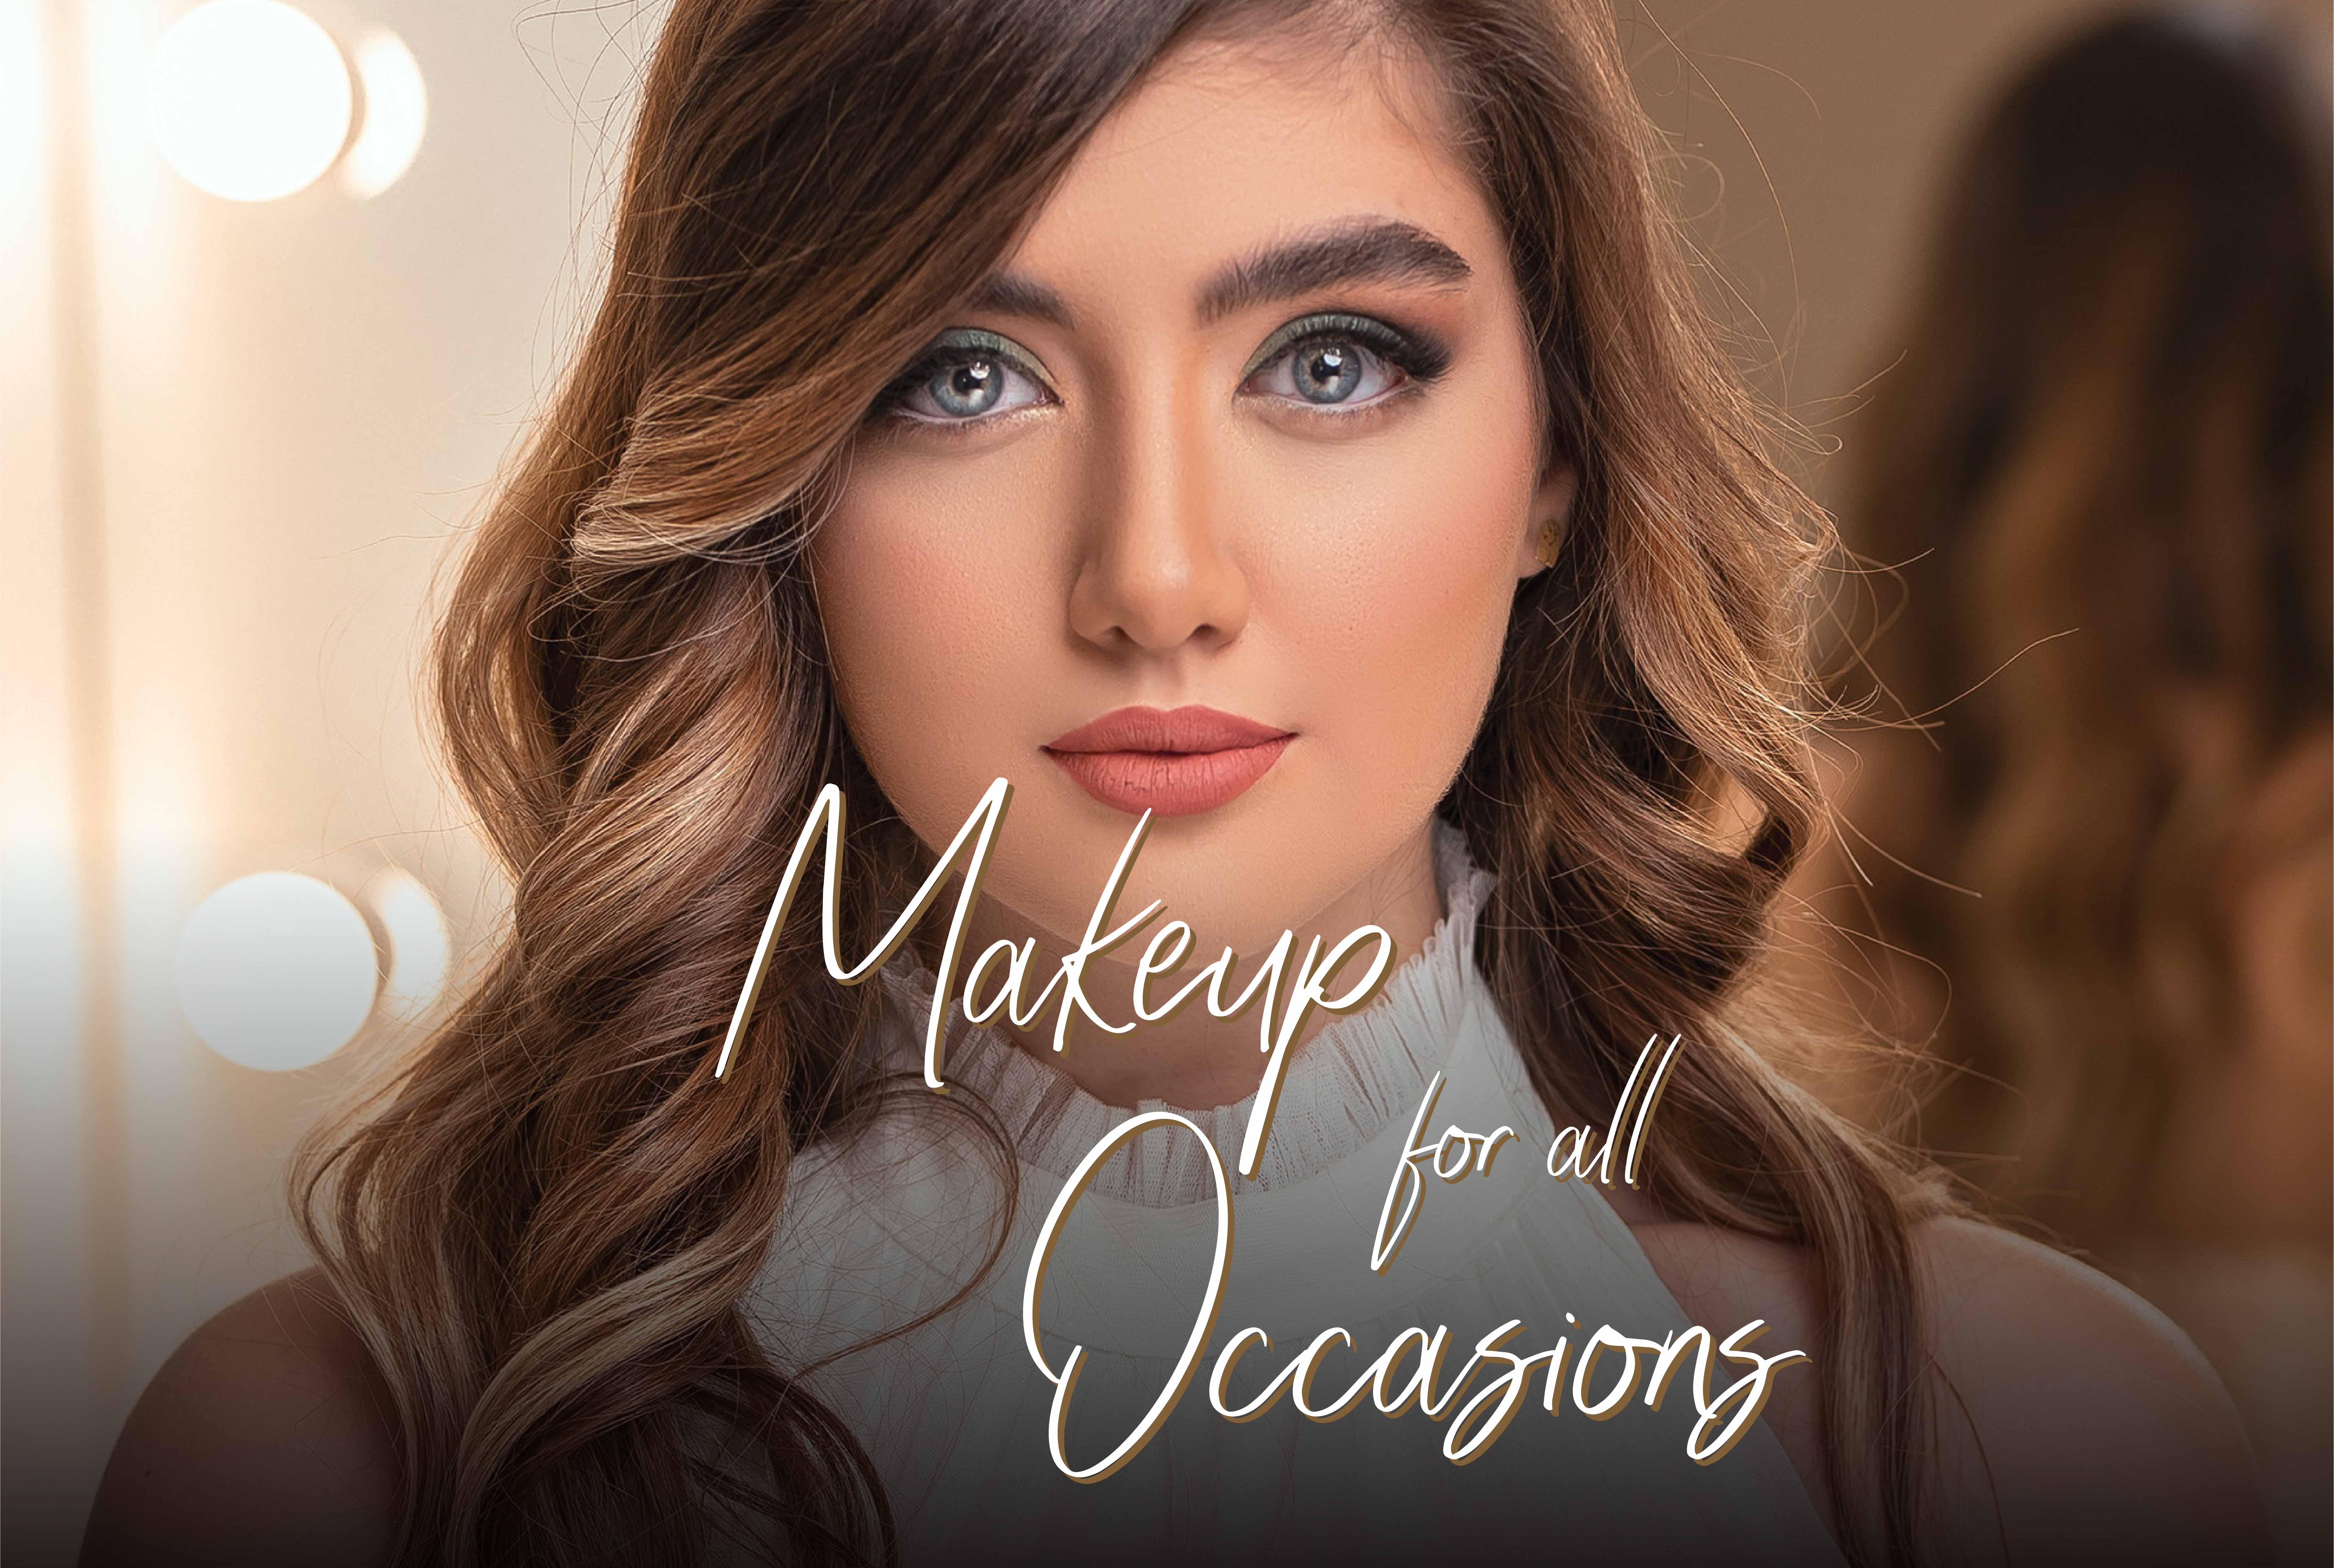 Beauty Makeup for all Occasions